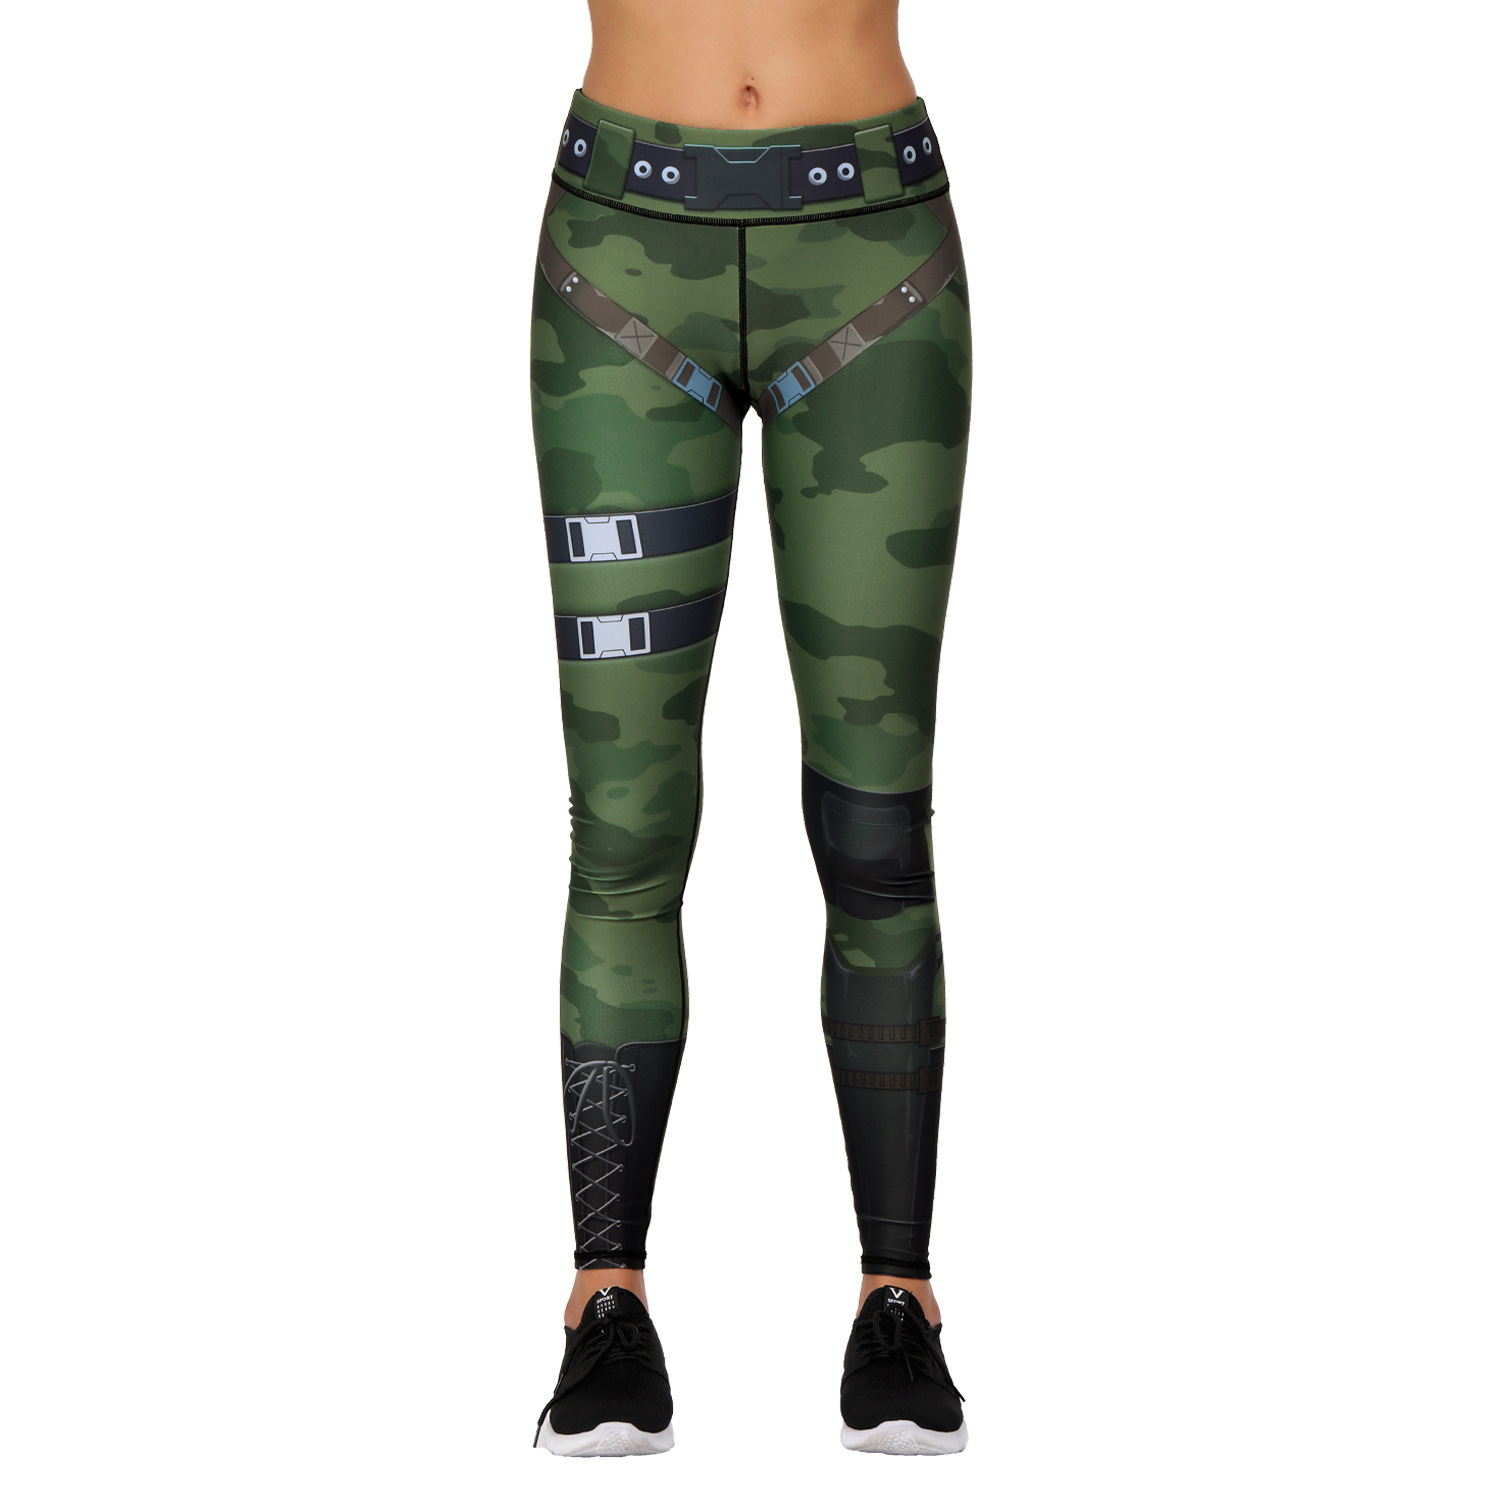 Printed Yoga Pants High Waist Fitness Plus Size Workout Leggings for Women Yoga Gym Atheletic Pants, Small Order, Stocklots,CAMO AOP